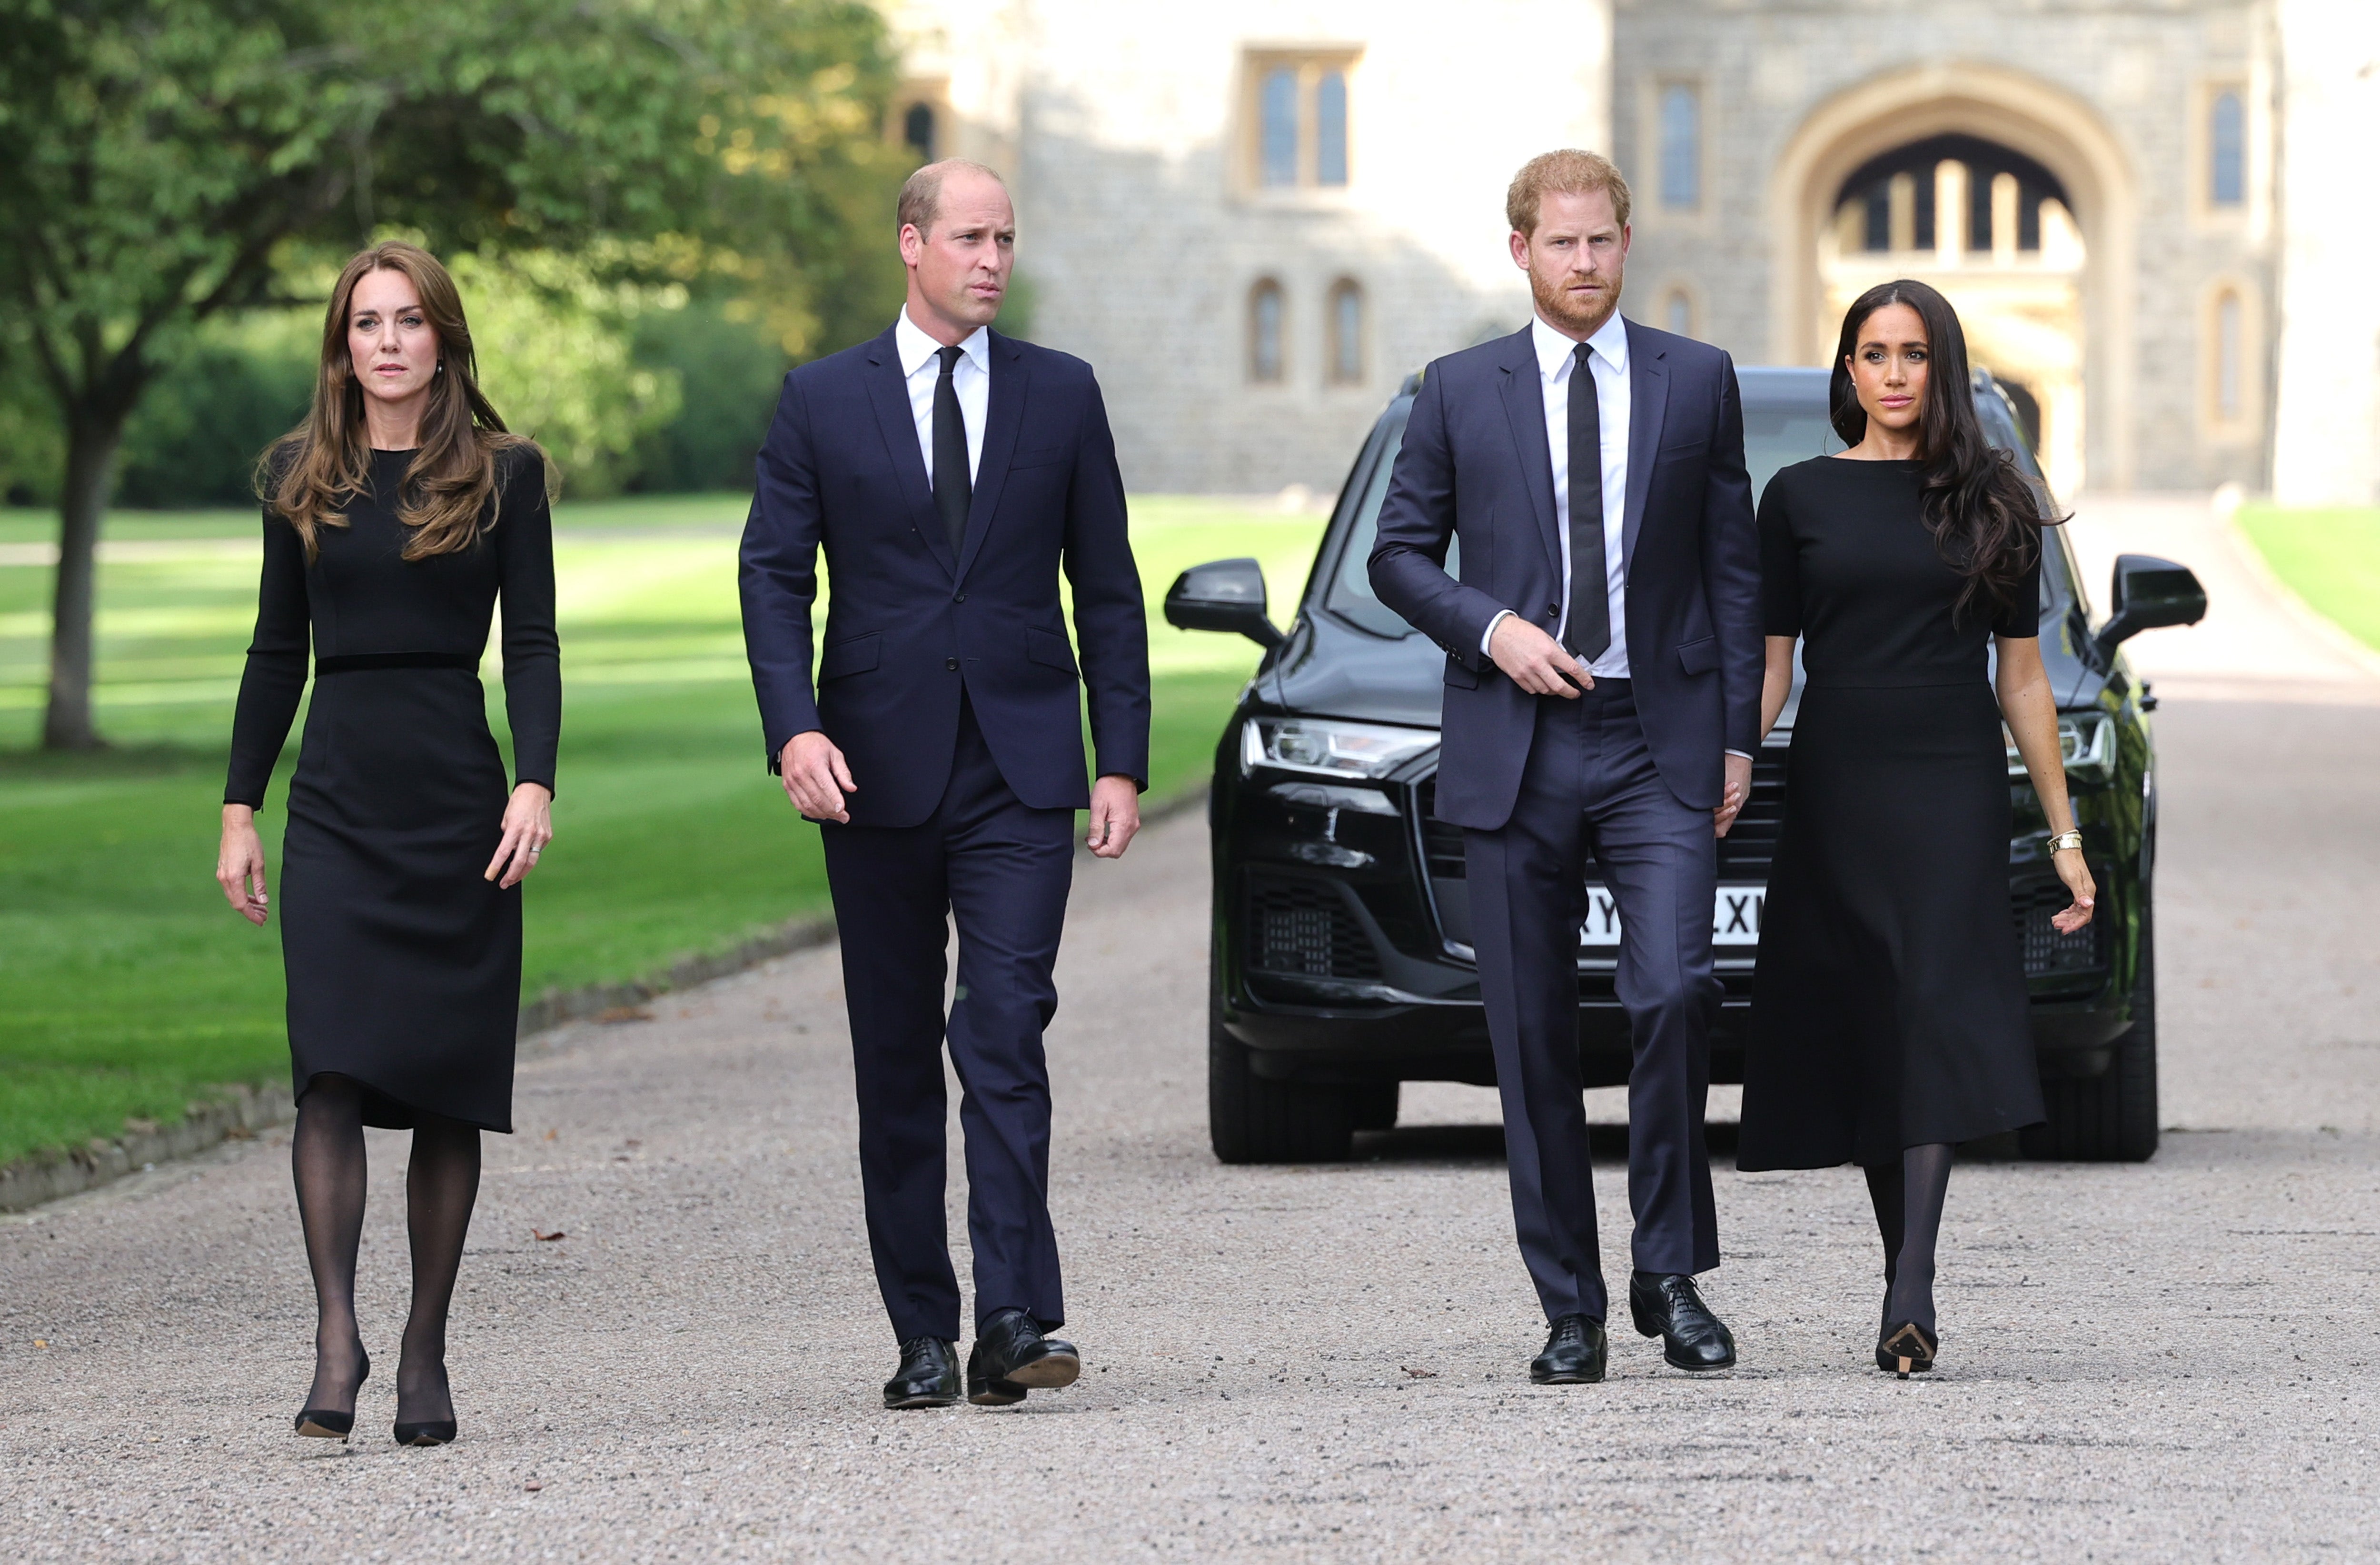 ‘Fab Four’ royal reunion in US? William, Kate to be in Boston days before Harry, Meghan to be honored in NY